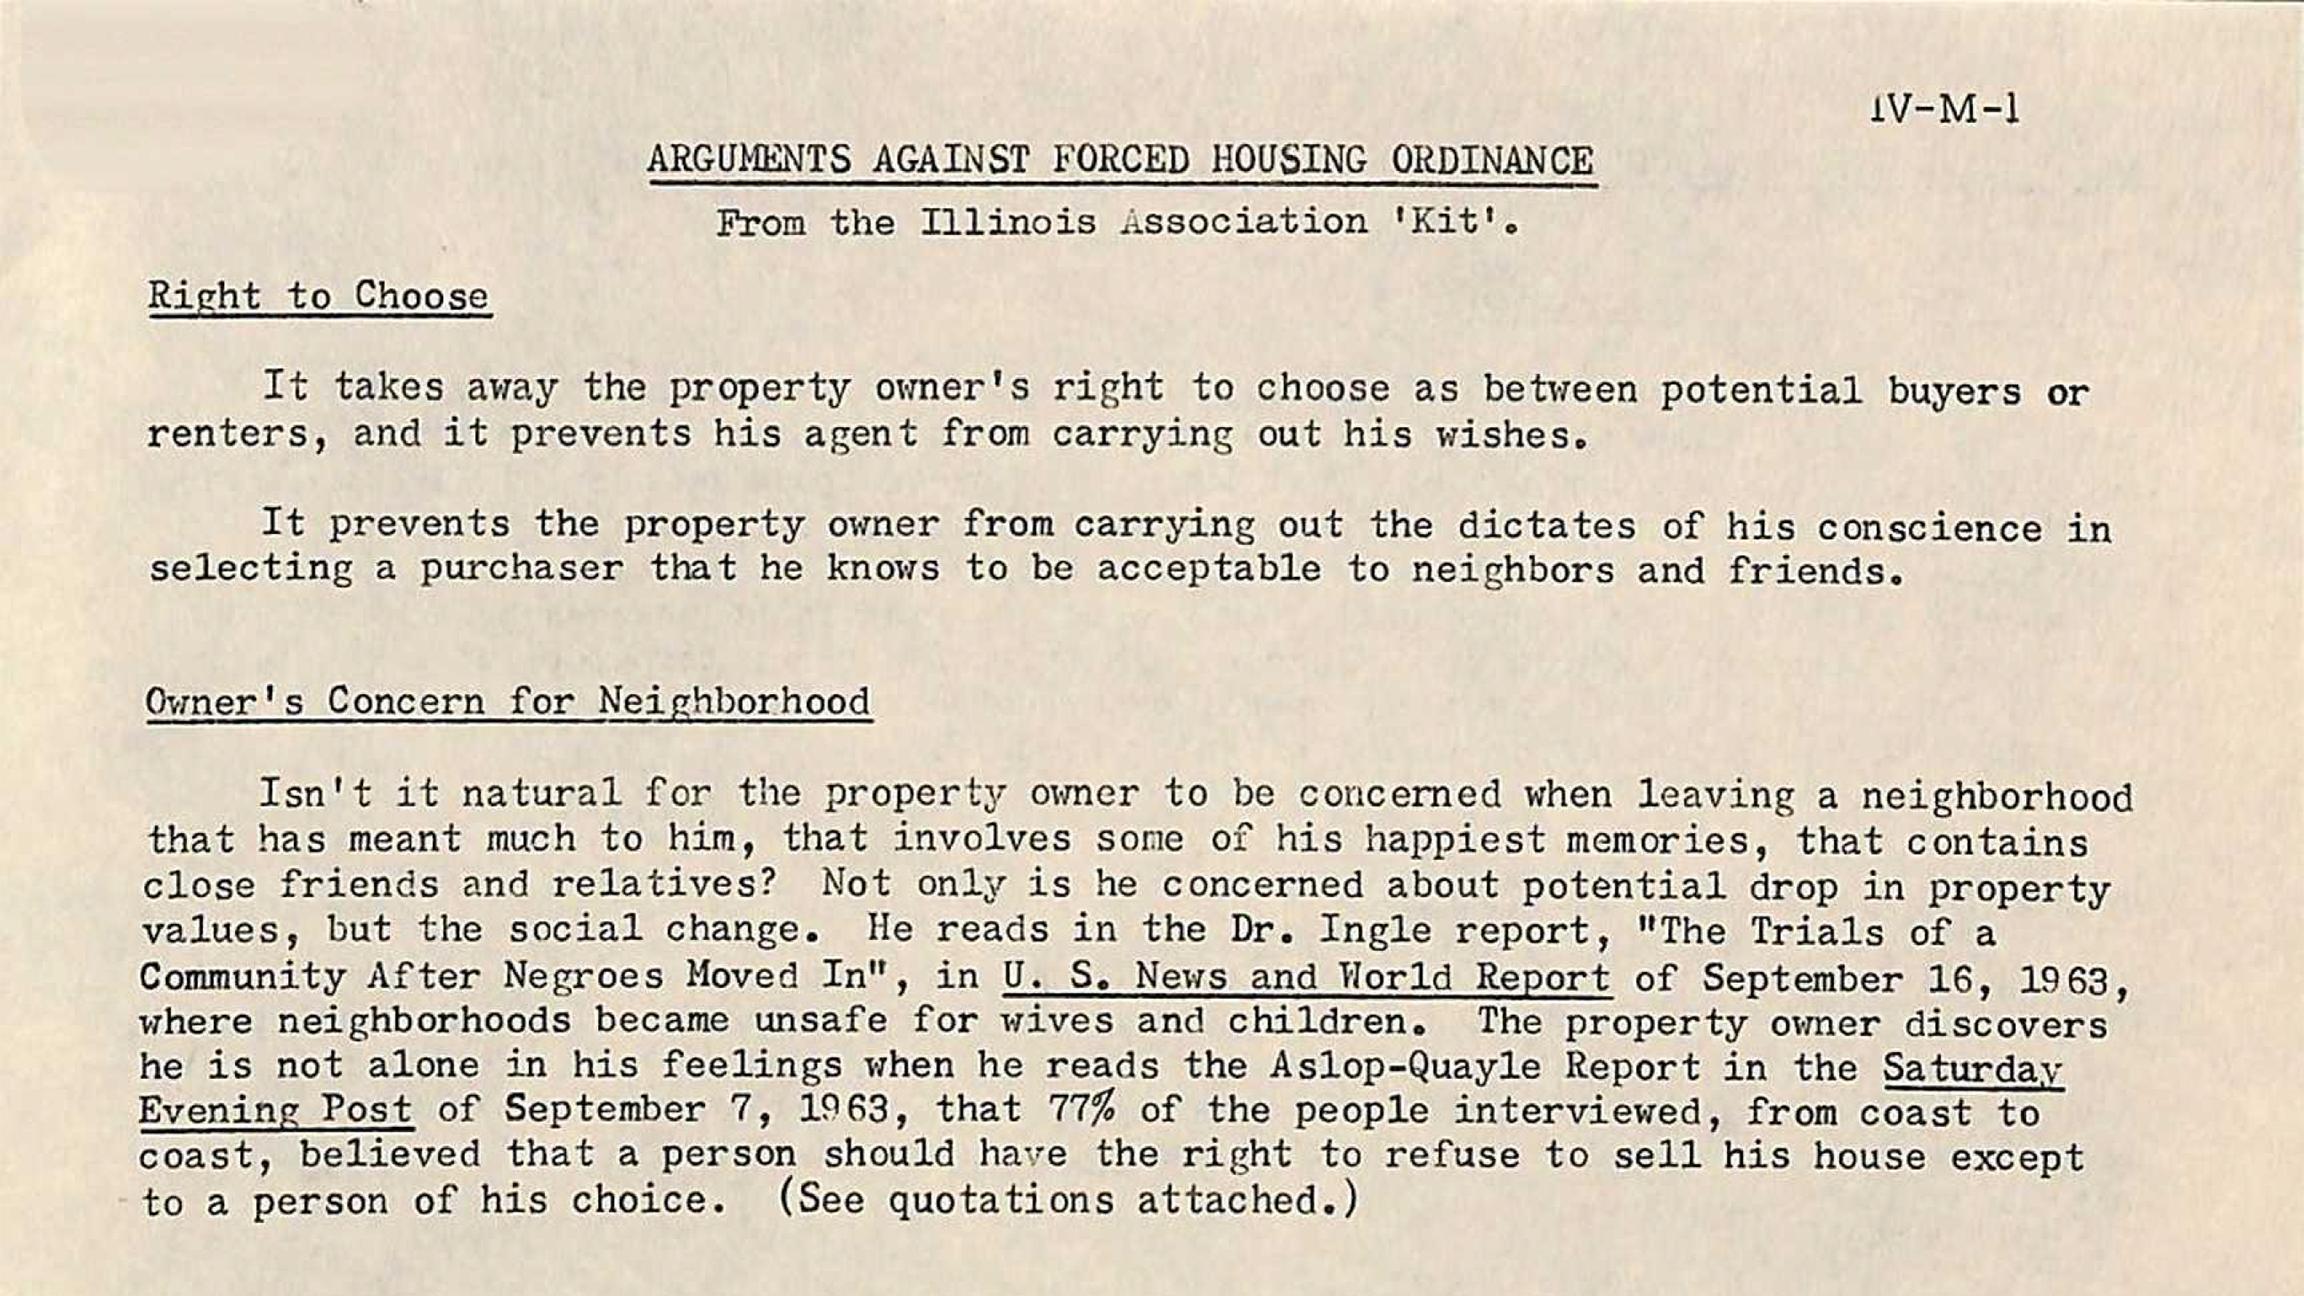 Document: “Arguments Against Forced Housing Ordinance” (Courtesy National Association of Realtors library)